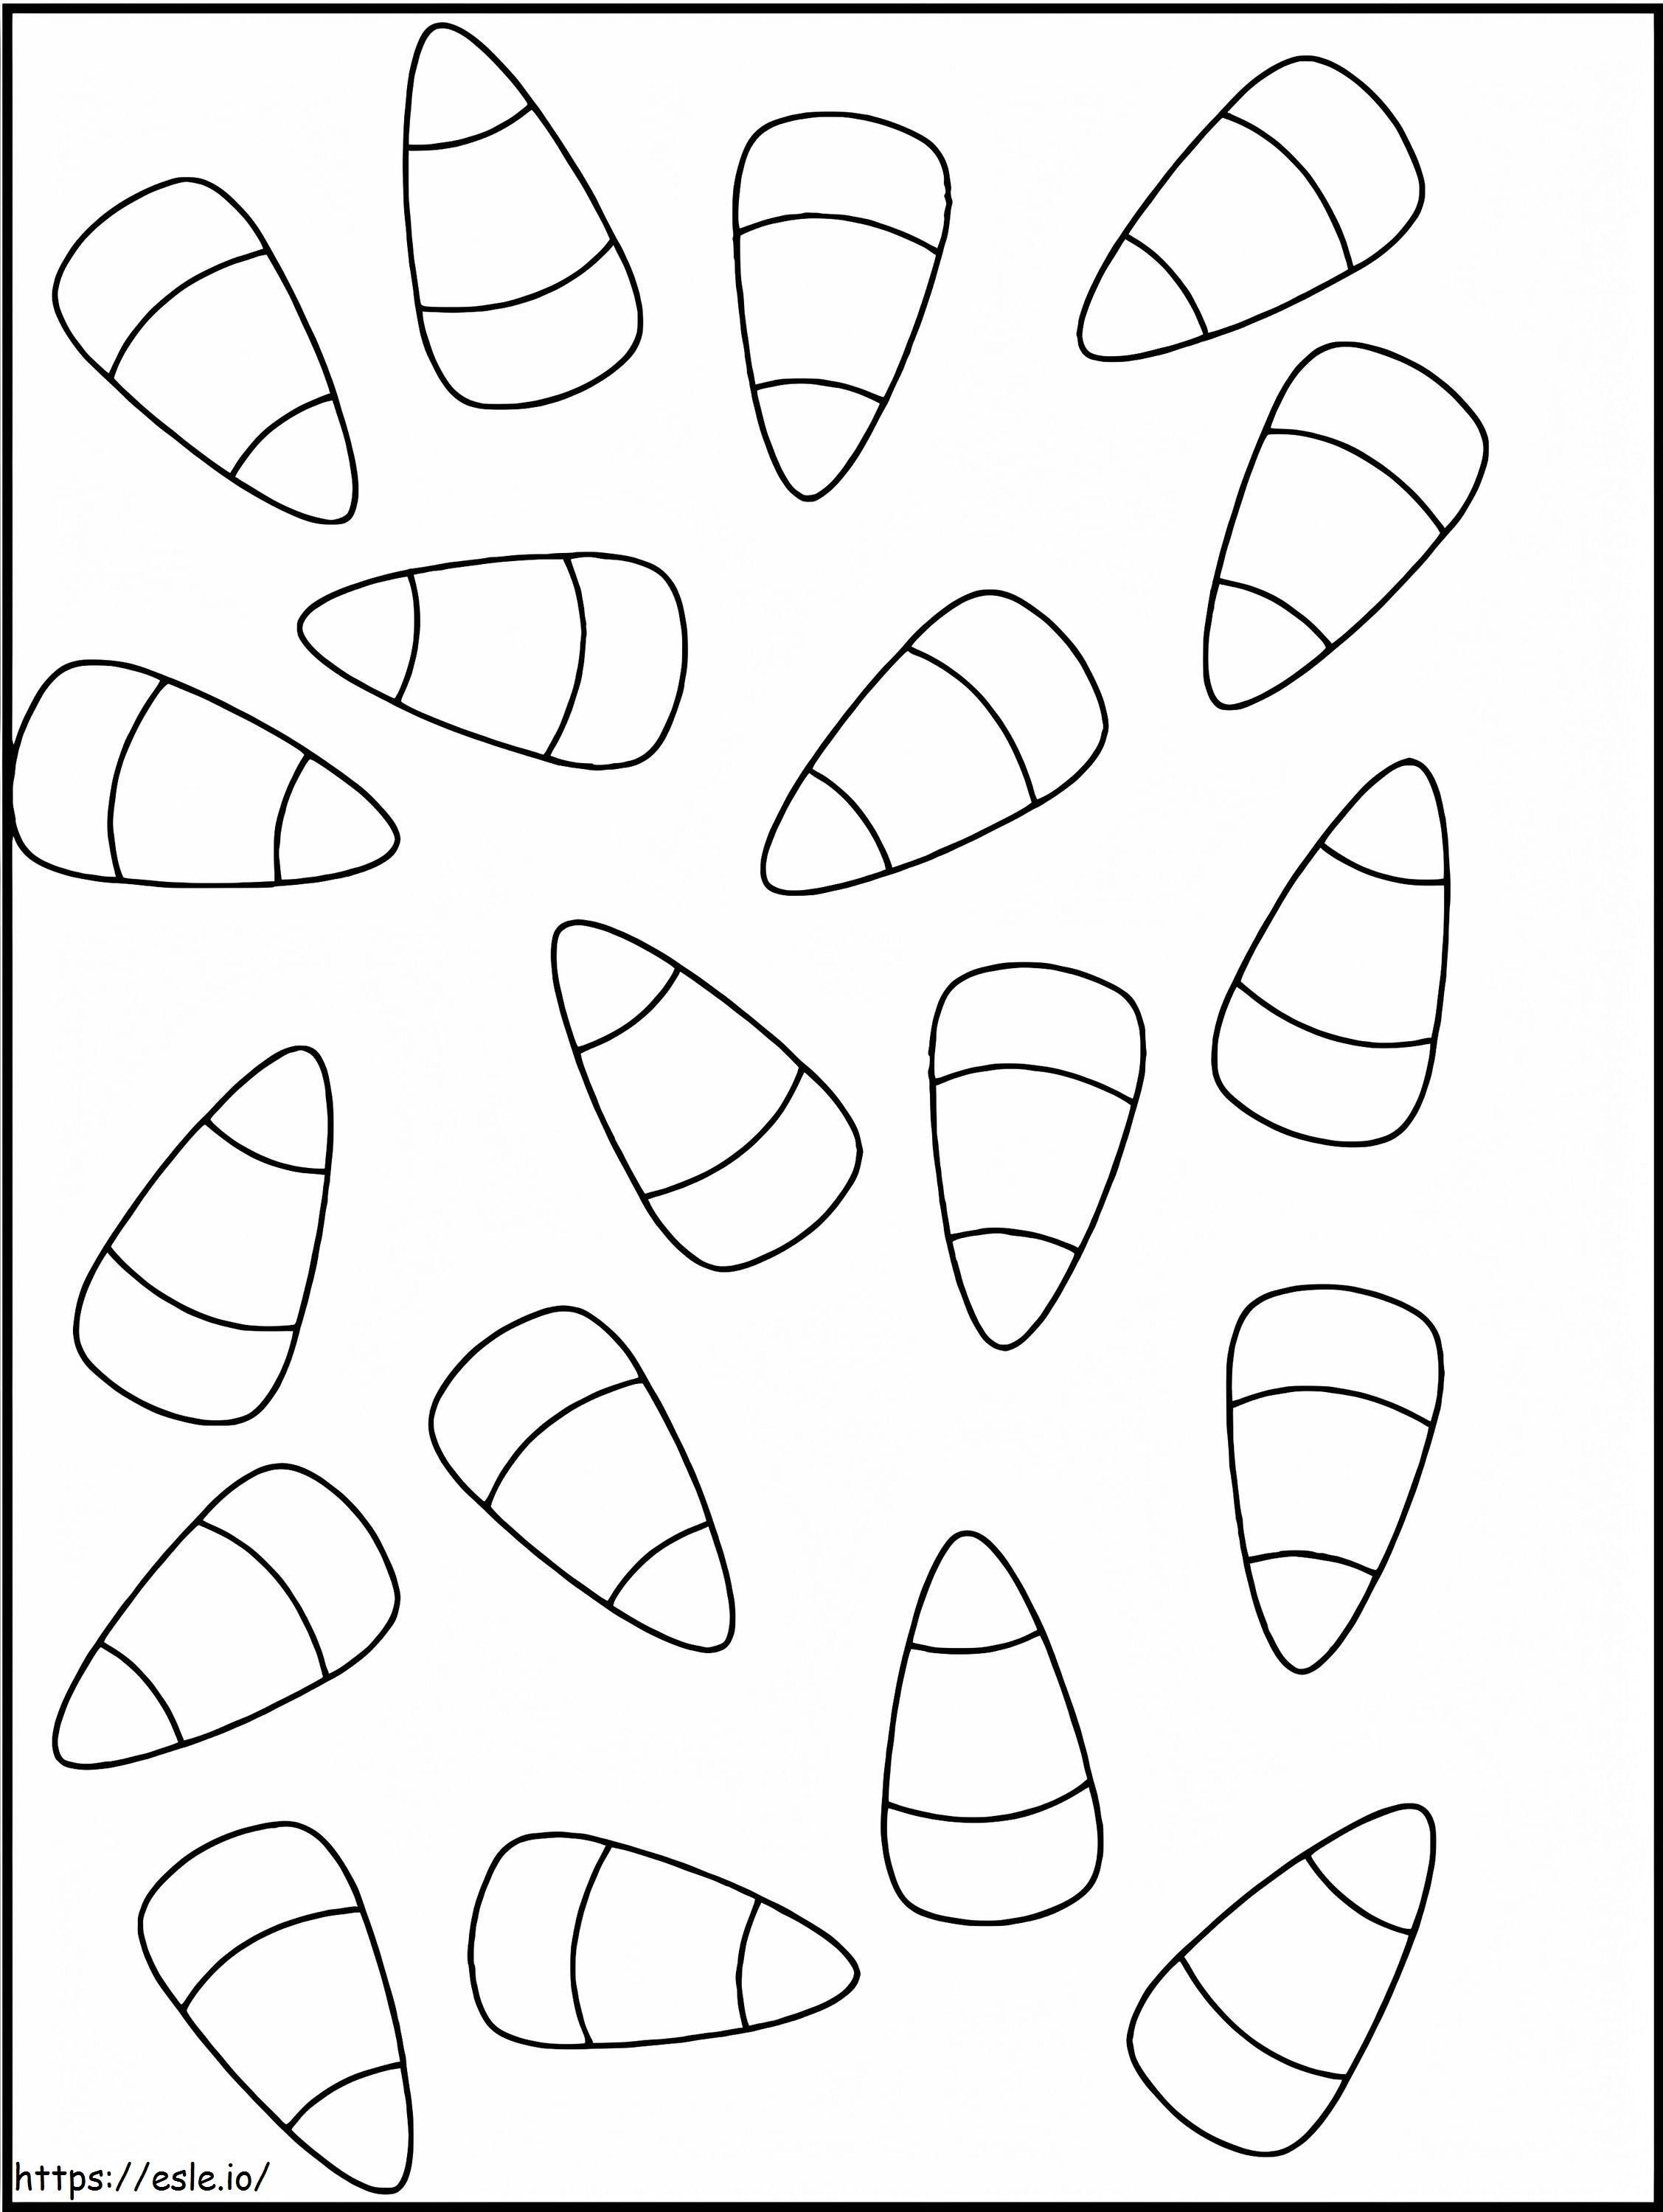 Candy Corn Printable coloring page